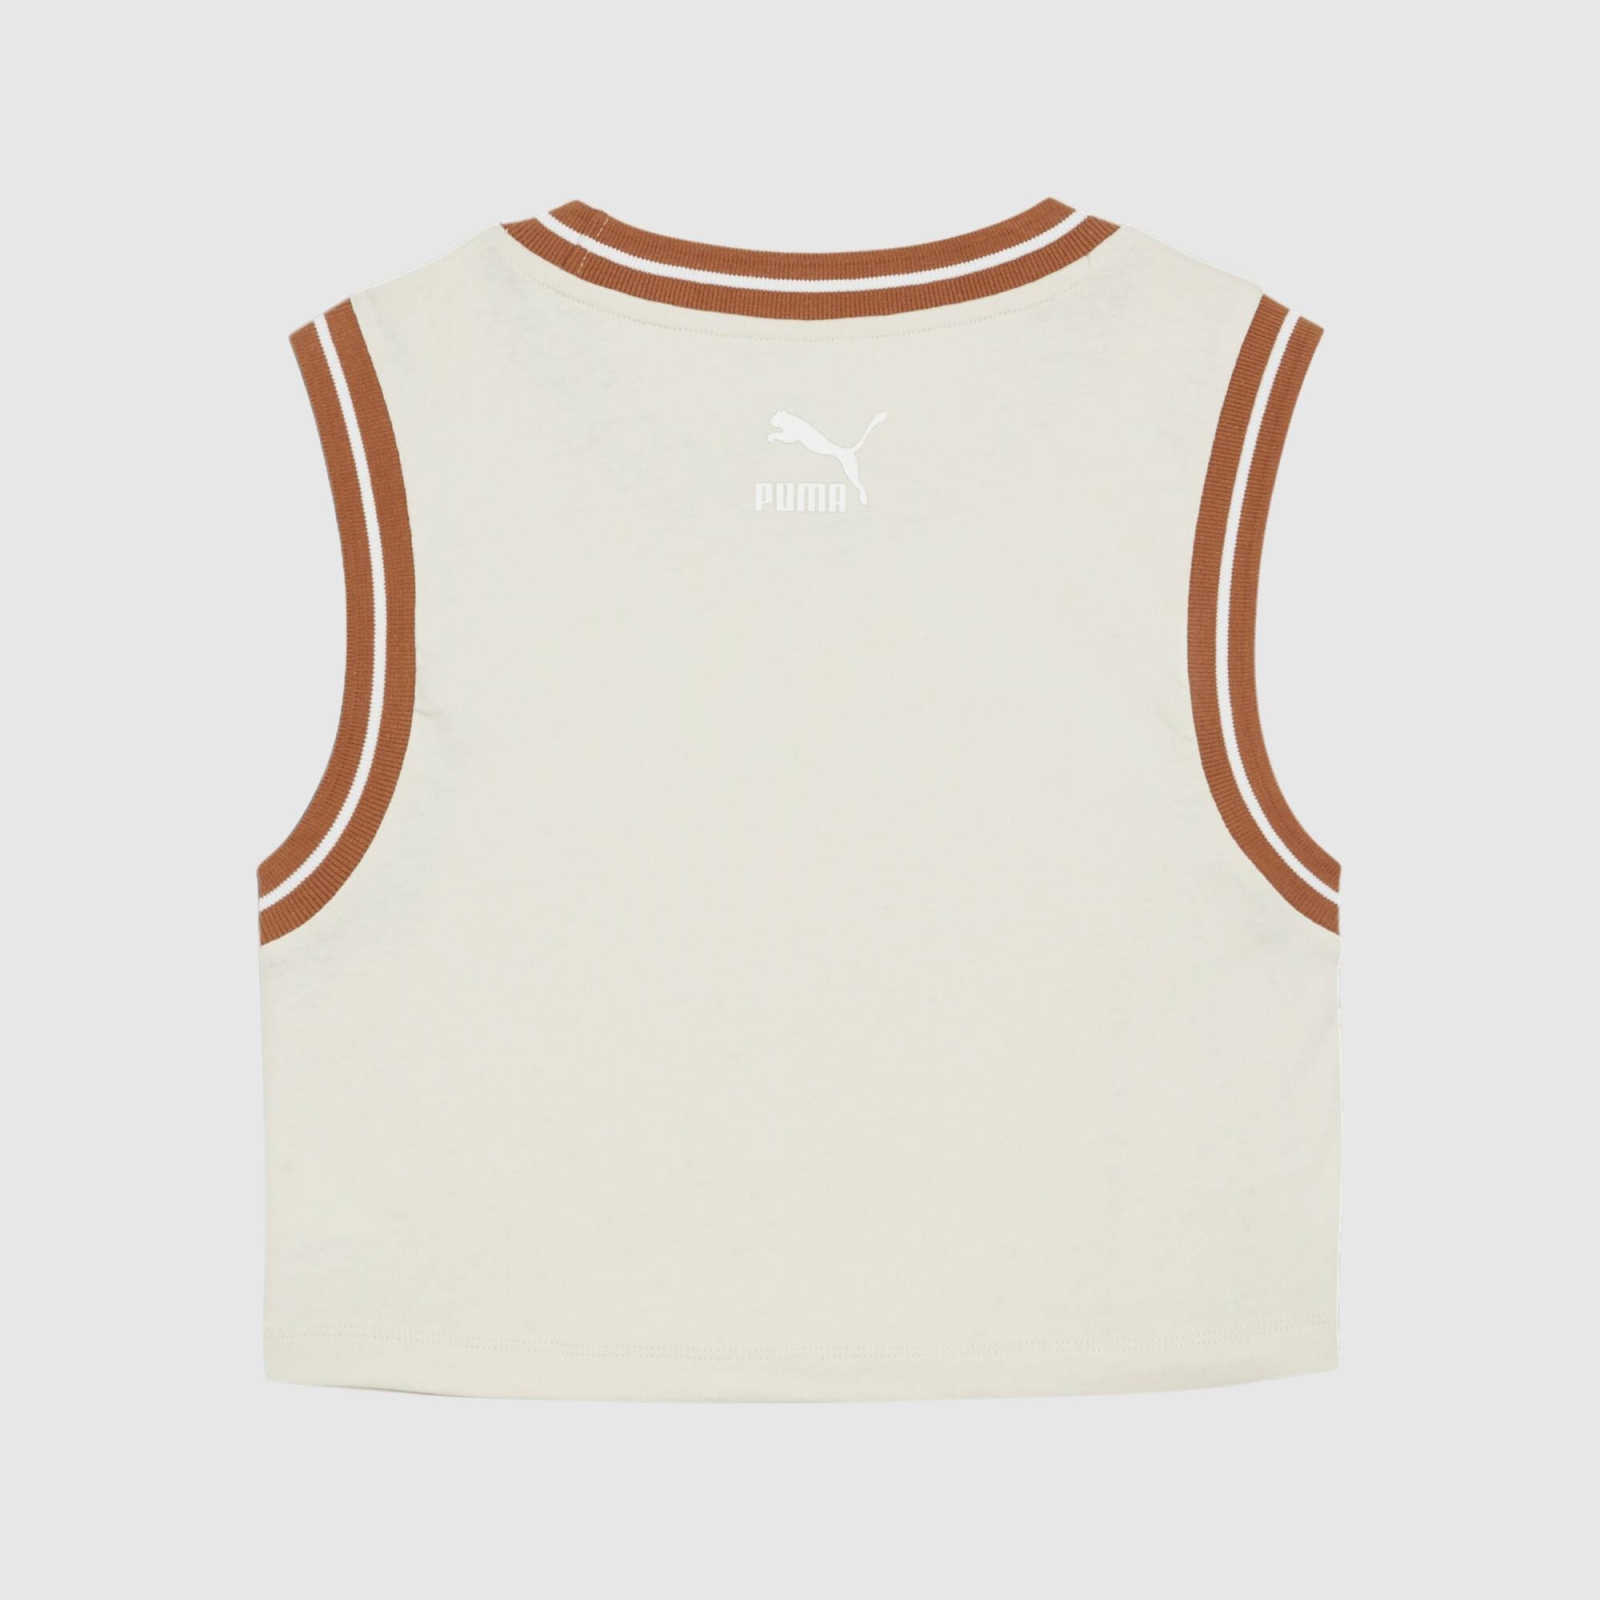 PUMA TEAM FOR THE FANBASE GRAPHIC CROPPED TEE